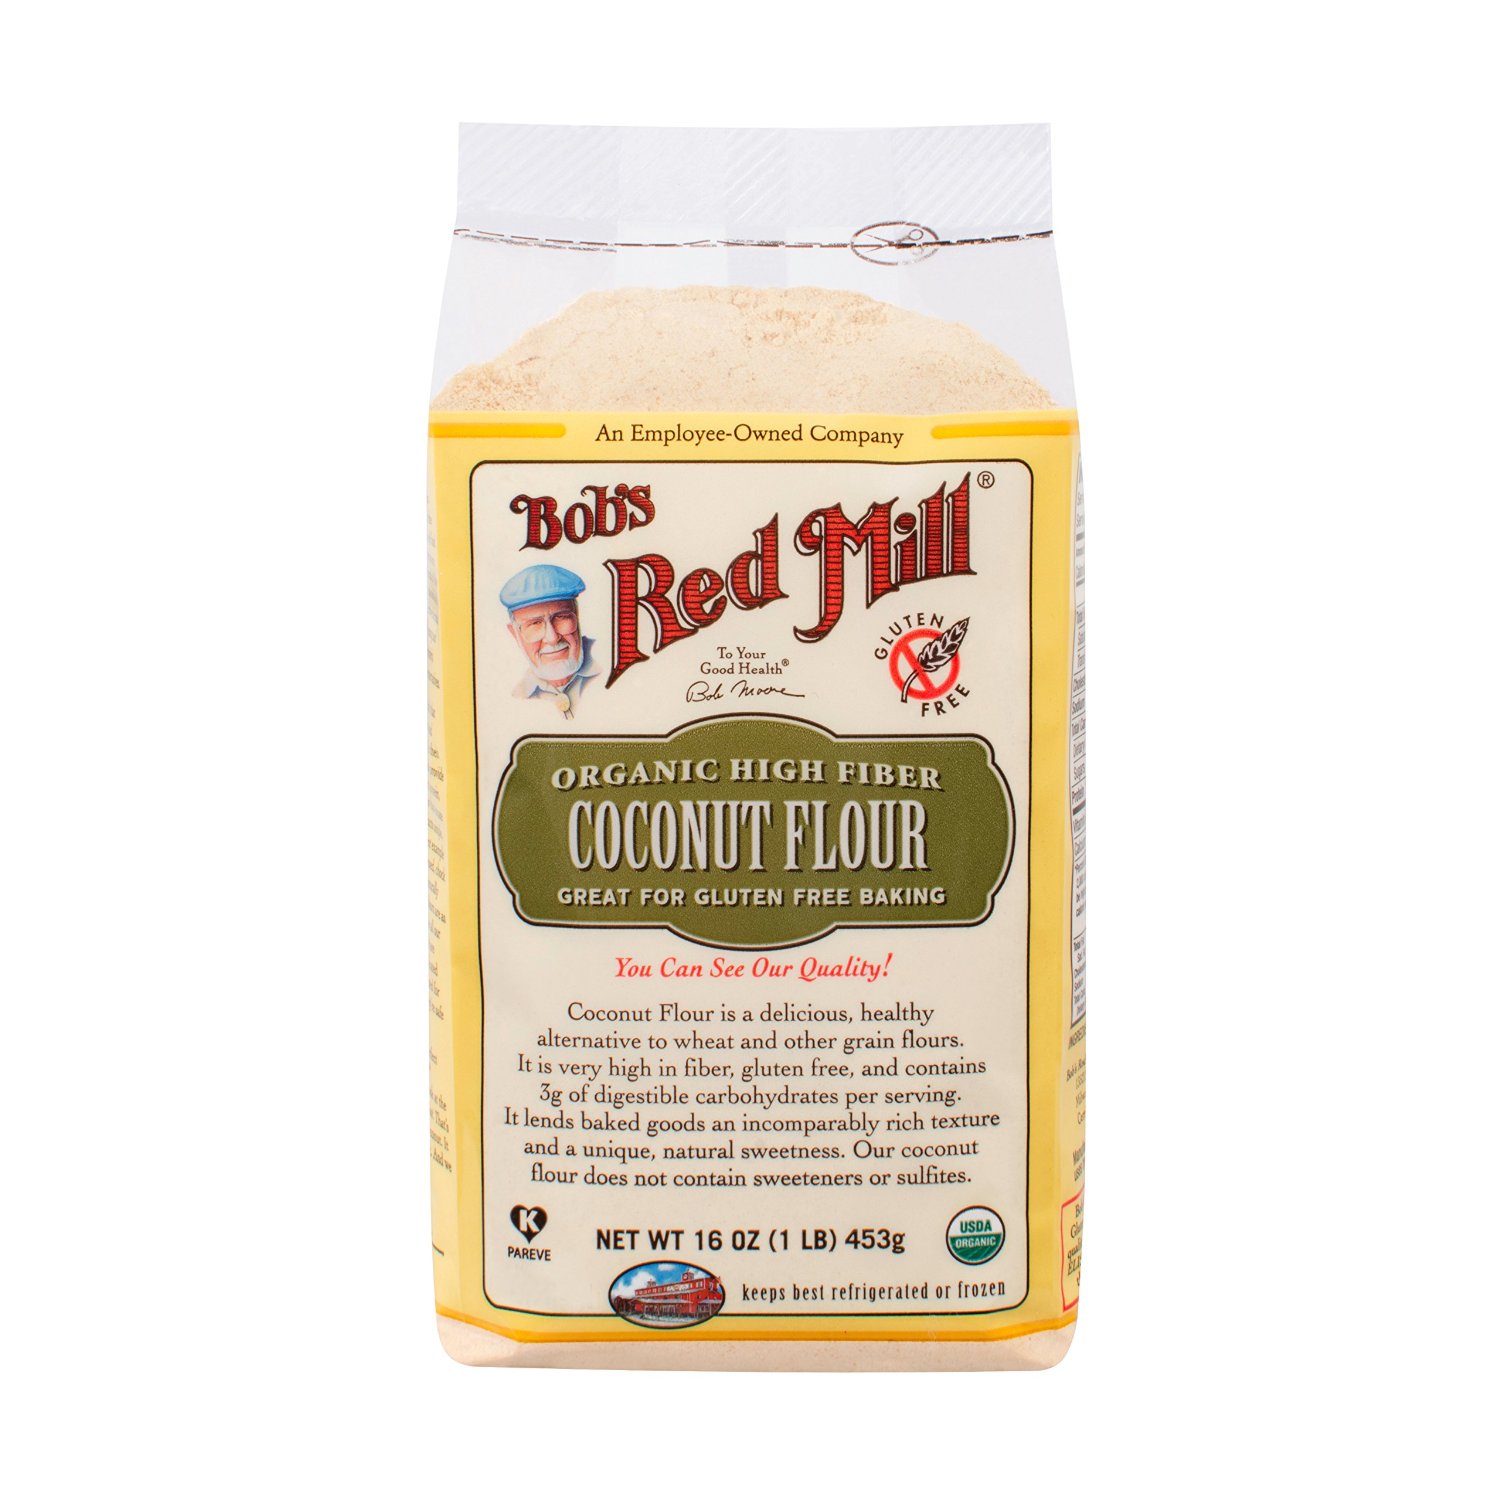 Bob's Red Mill Organic Coconut Flour, 16-Ounce Units (Pack of 4) Deal